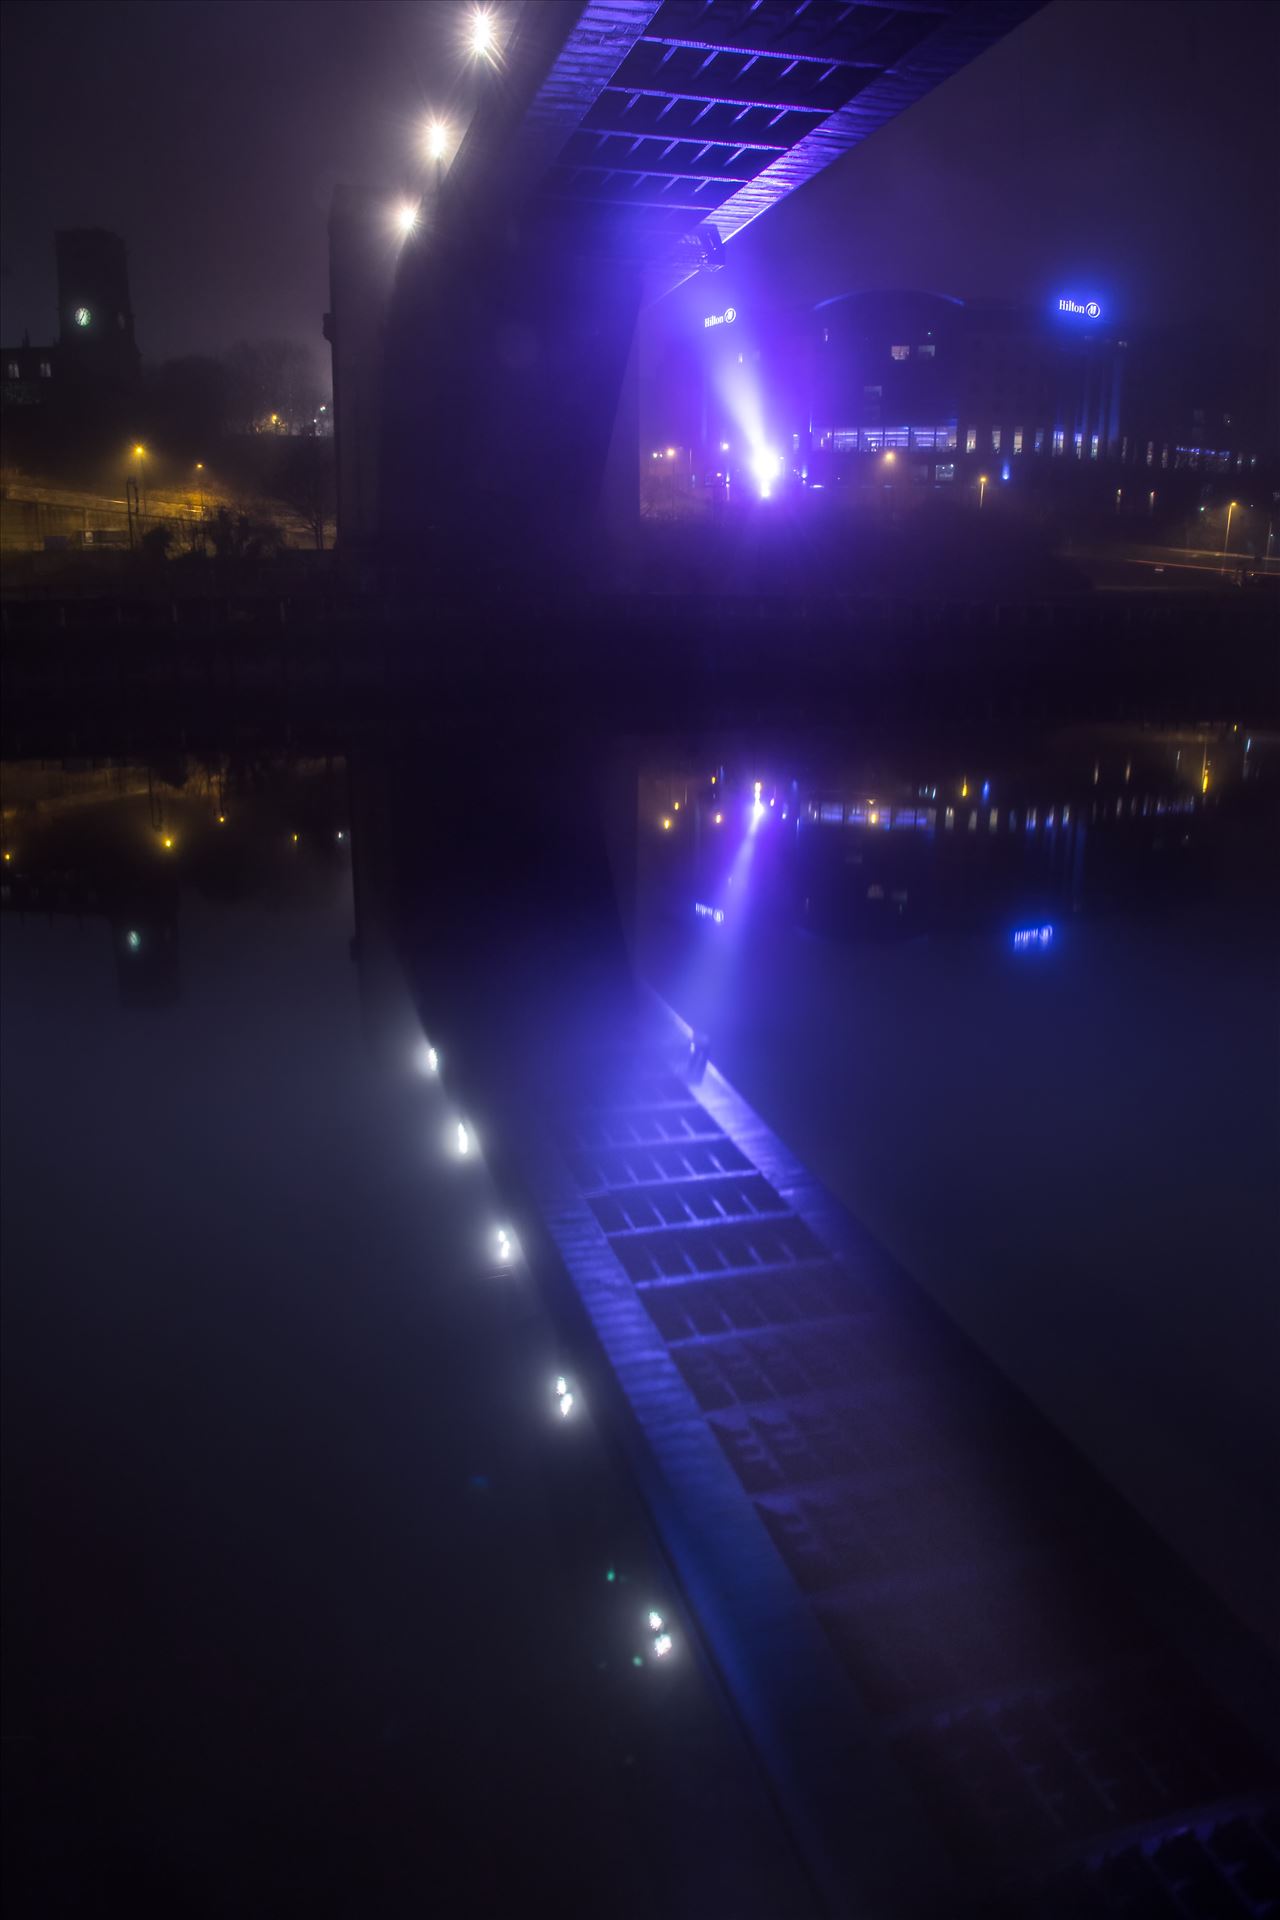 Fog on the Tyne 2 Shot on the quayside at Newcastle early one foggy morning by philreay